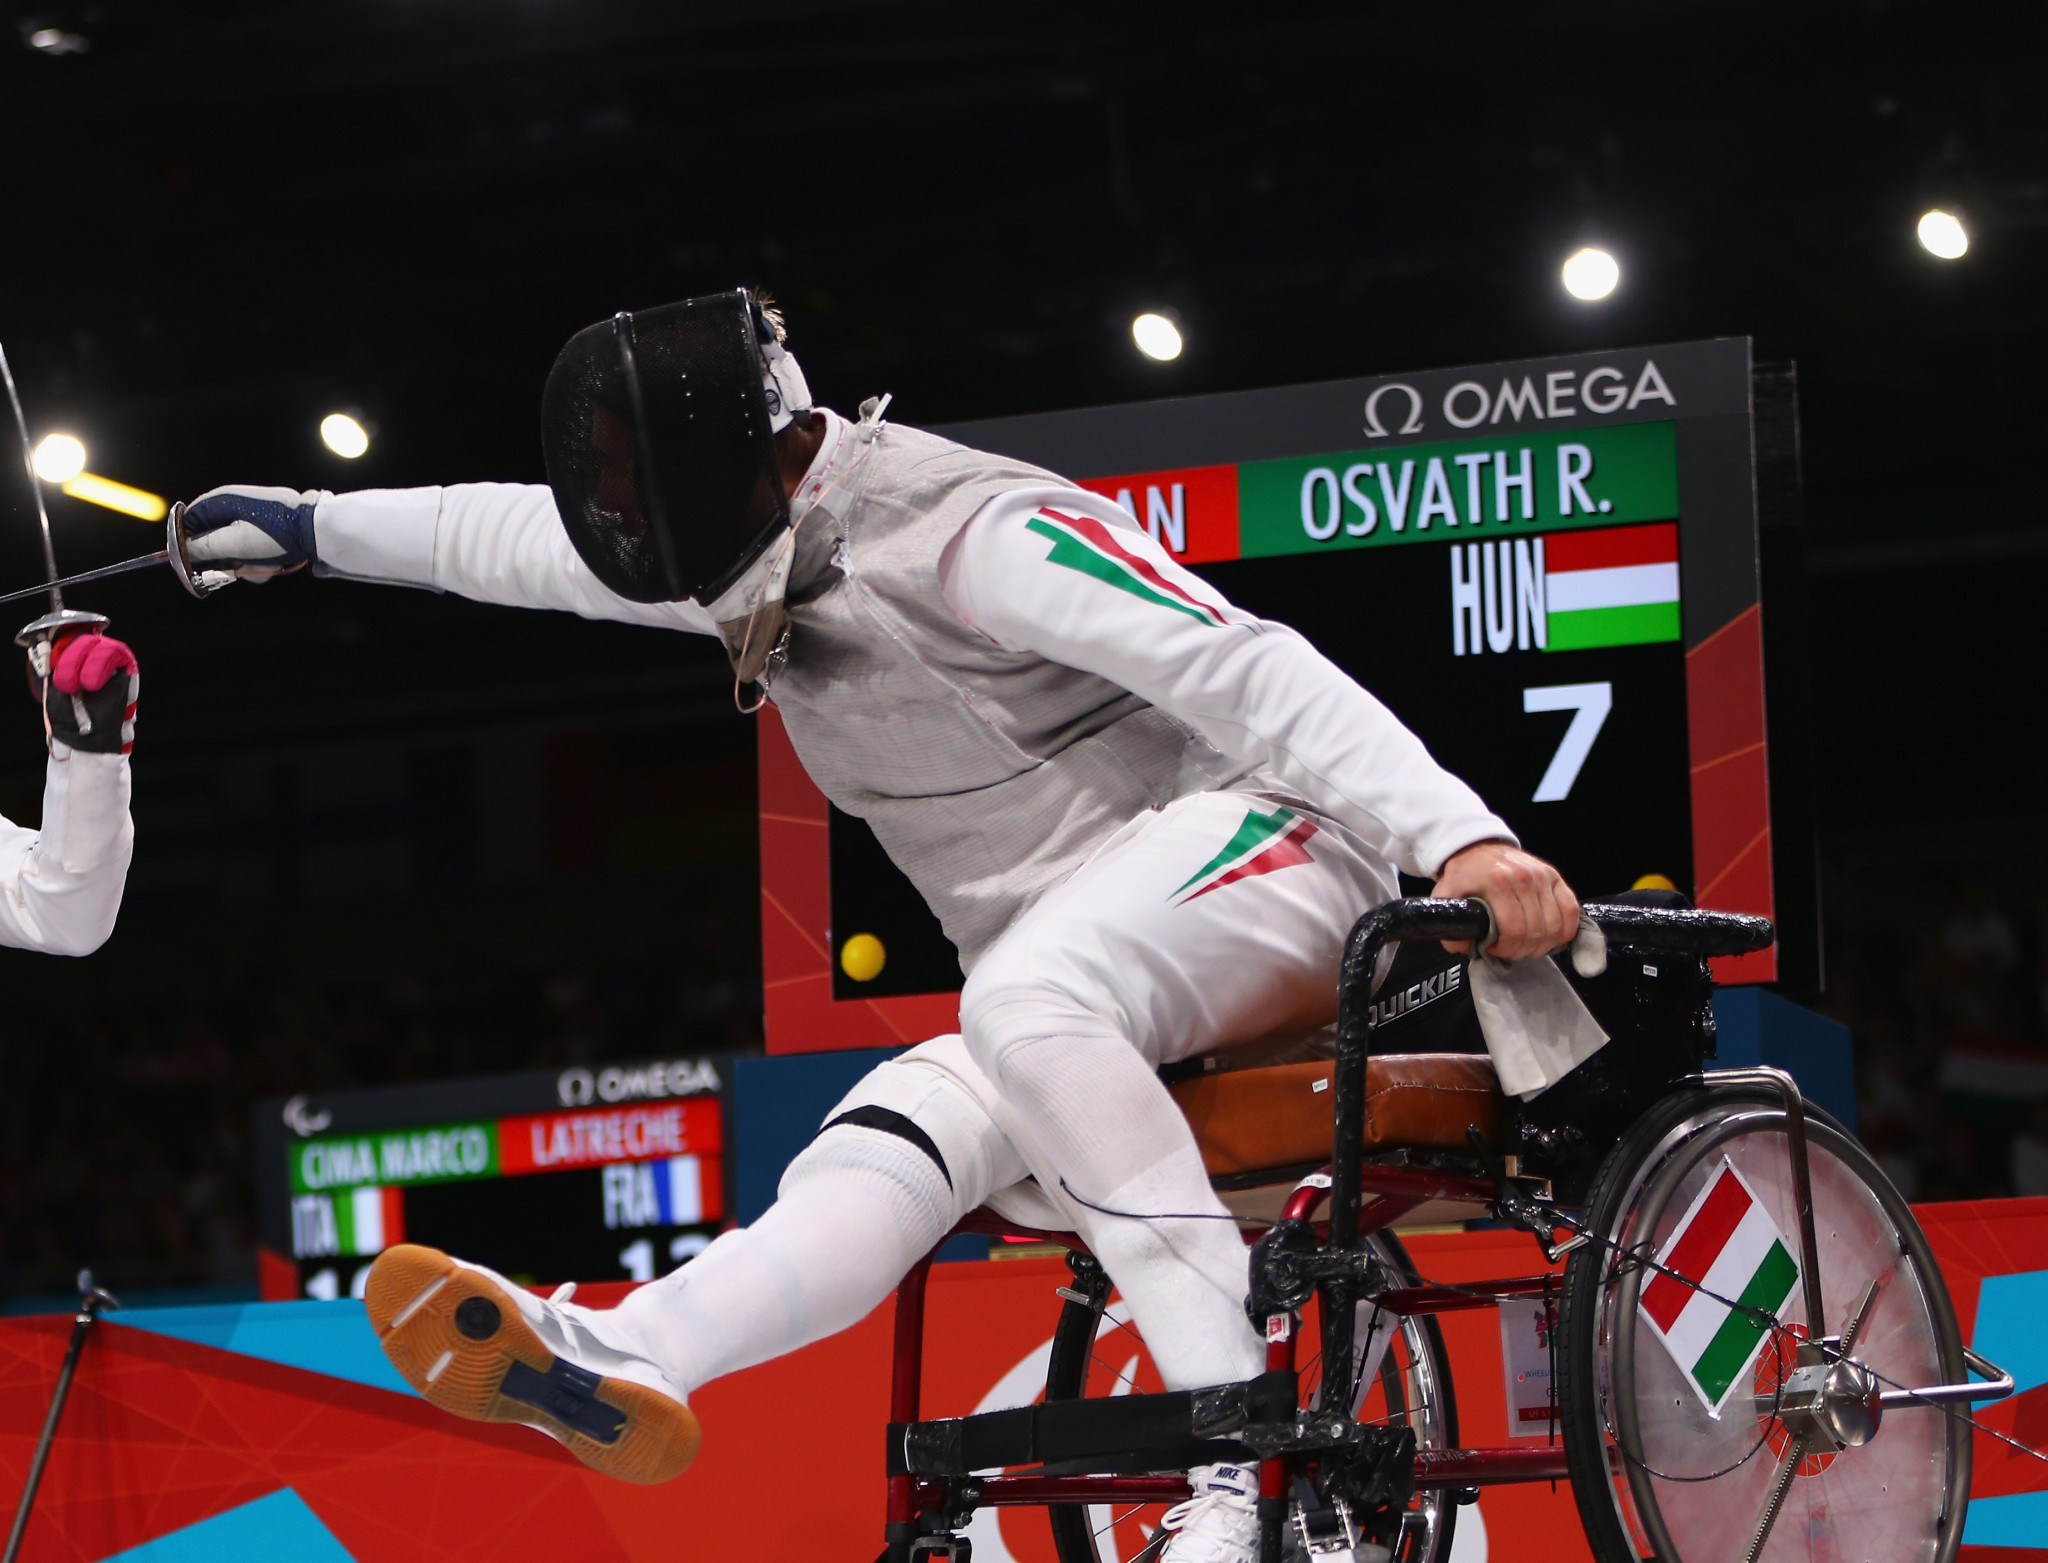 Tokyo 2020 medallists to end season at Pisa IWAS Wheelchair Fencing World Cup